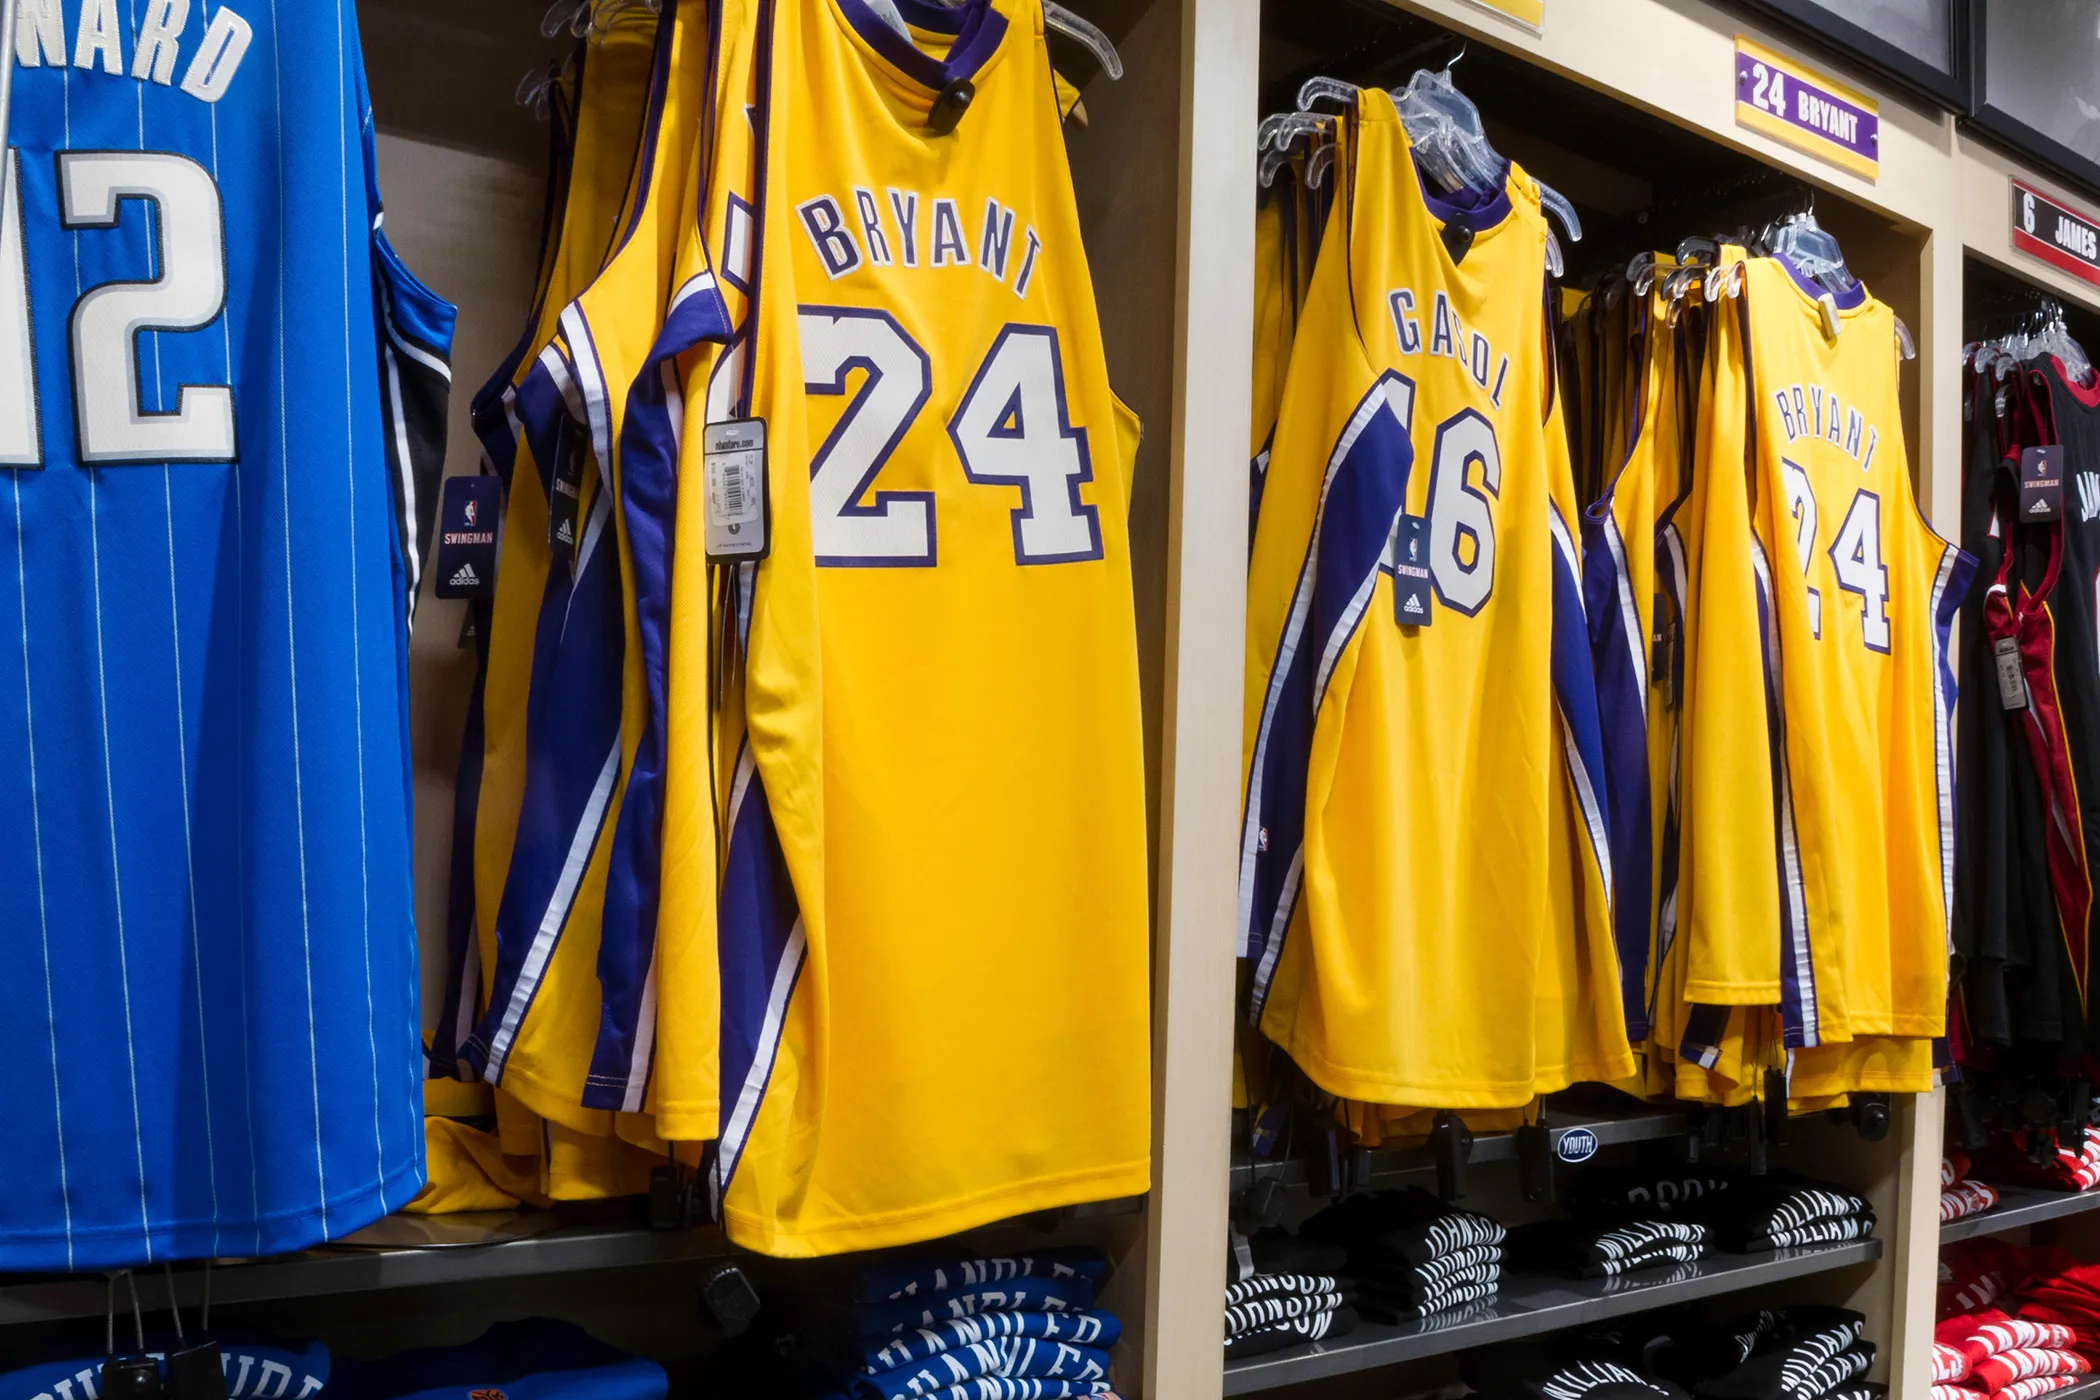 Lakers set record by selling $1.2 million worth of Kobe Bryant swag